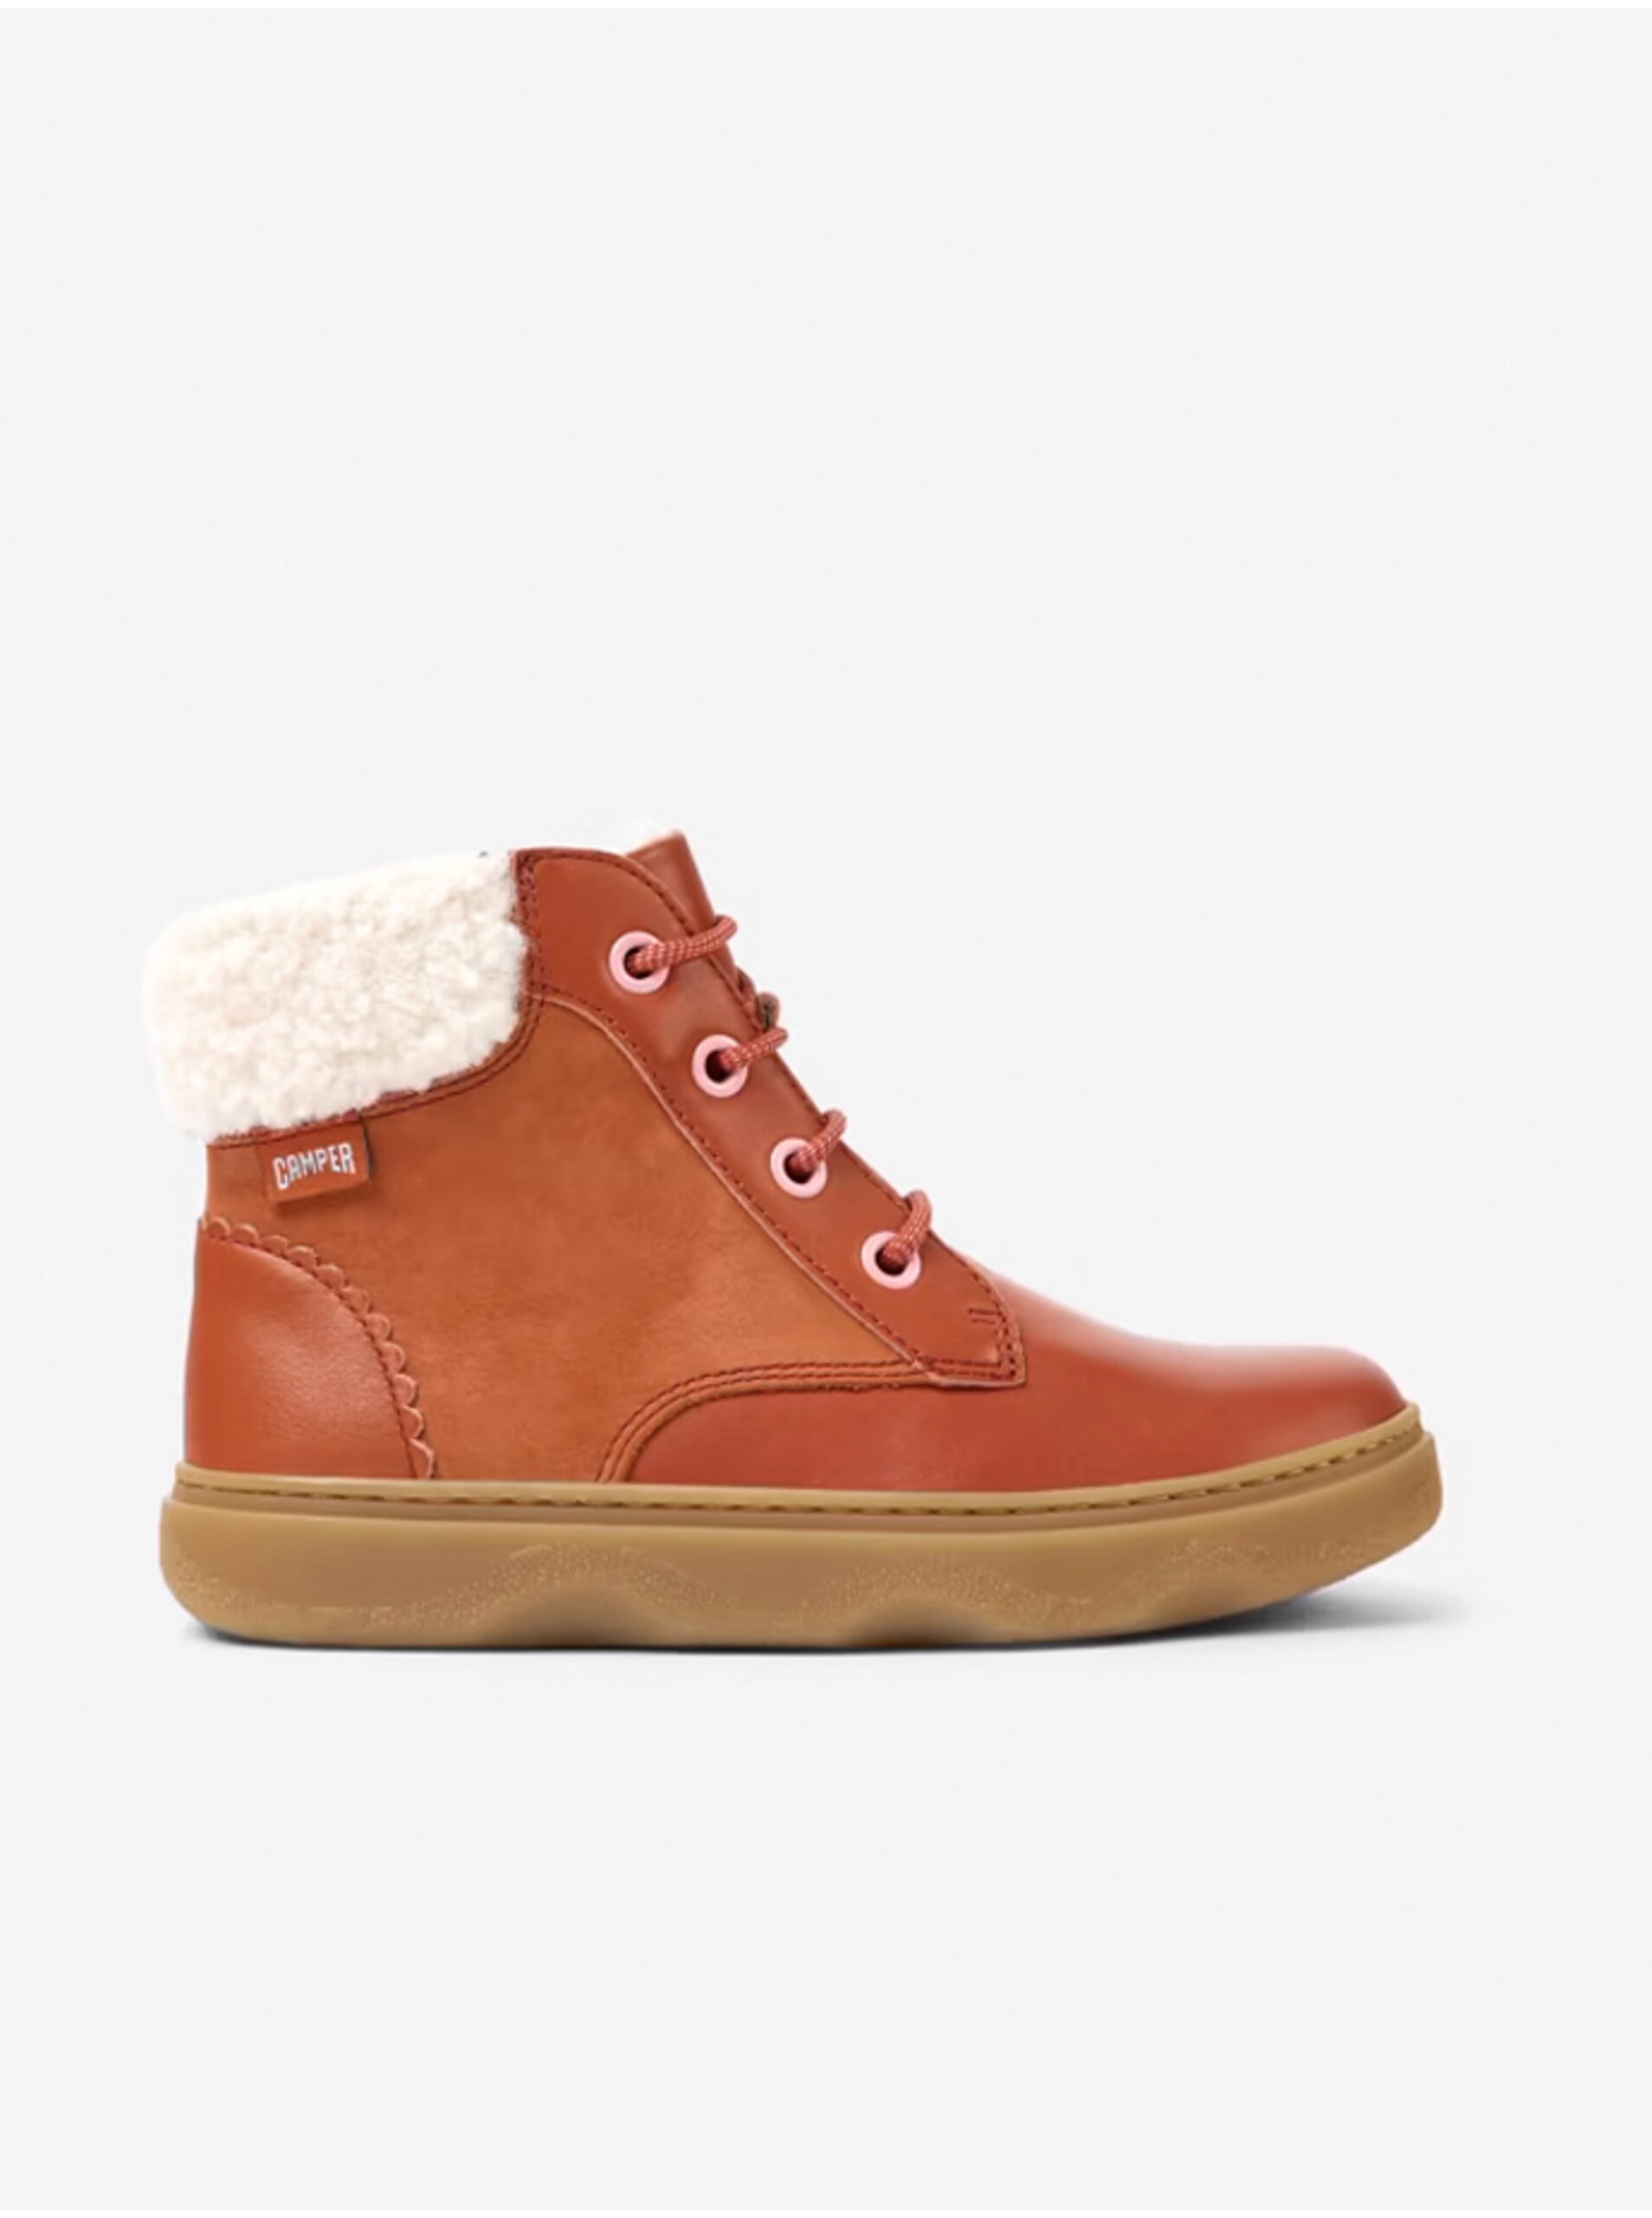 Brick Girls' Winter Leather Ankle Boots Camper Kido - Girls